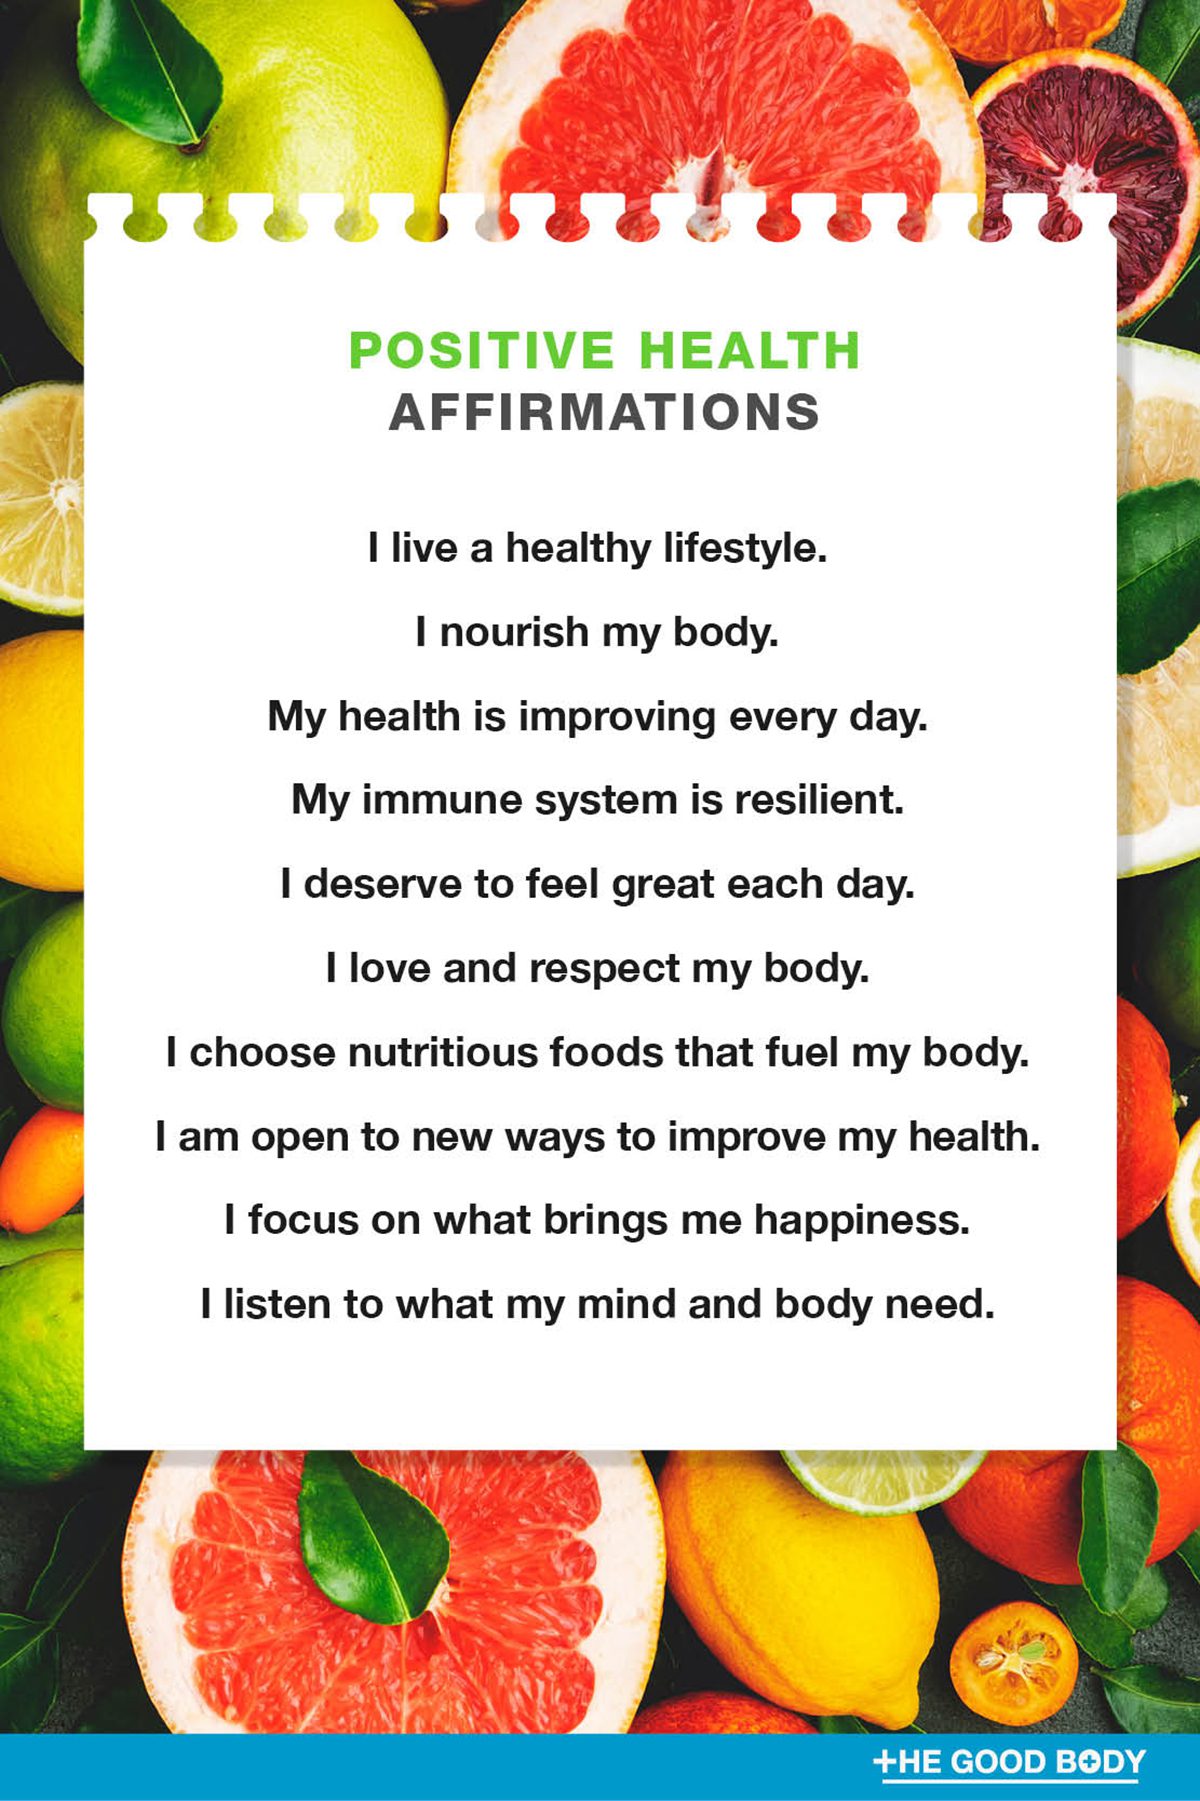 10 Positive Health Affirmations on White Note Paper Set Against Fruits Background